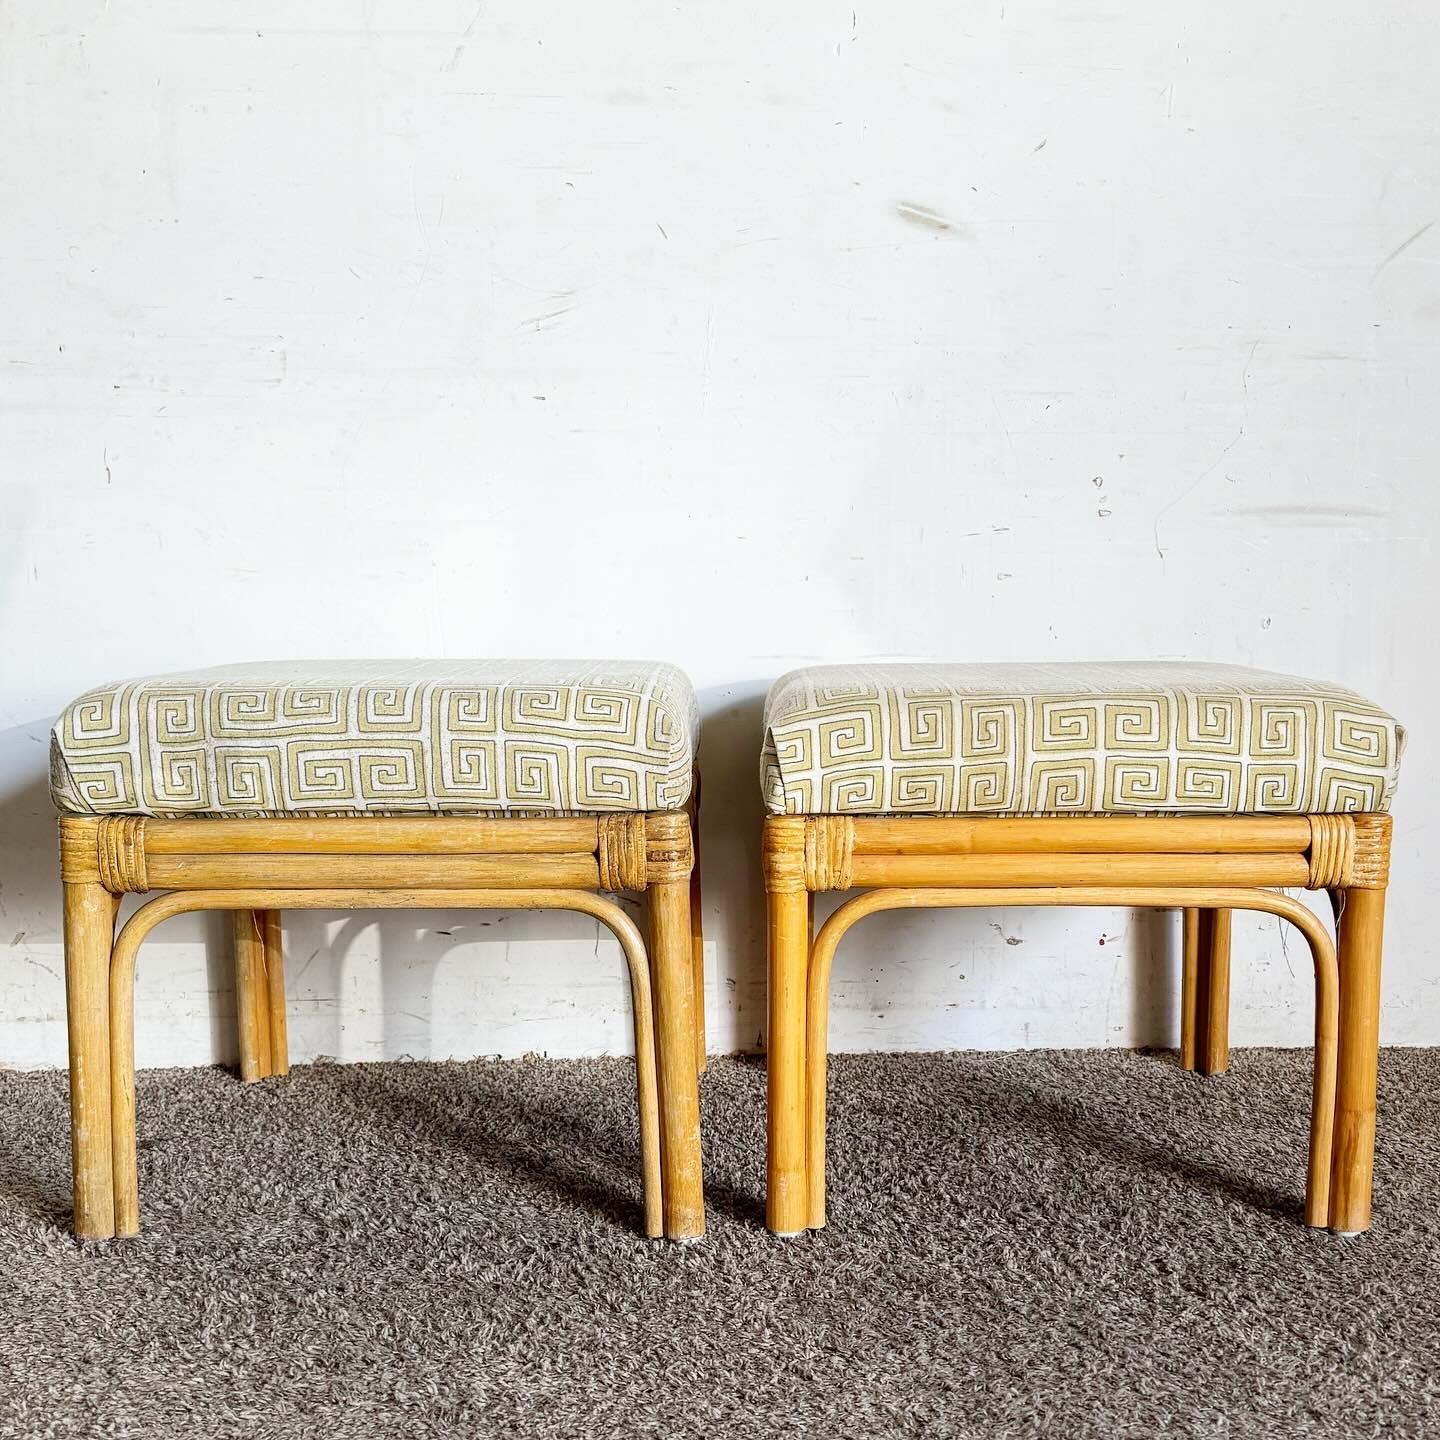 Boho Chic Bamboo Rattan Square Top Ottomans/Low Stools - a Pair For Sale 4